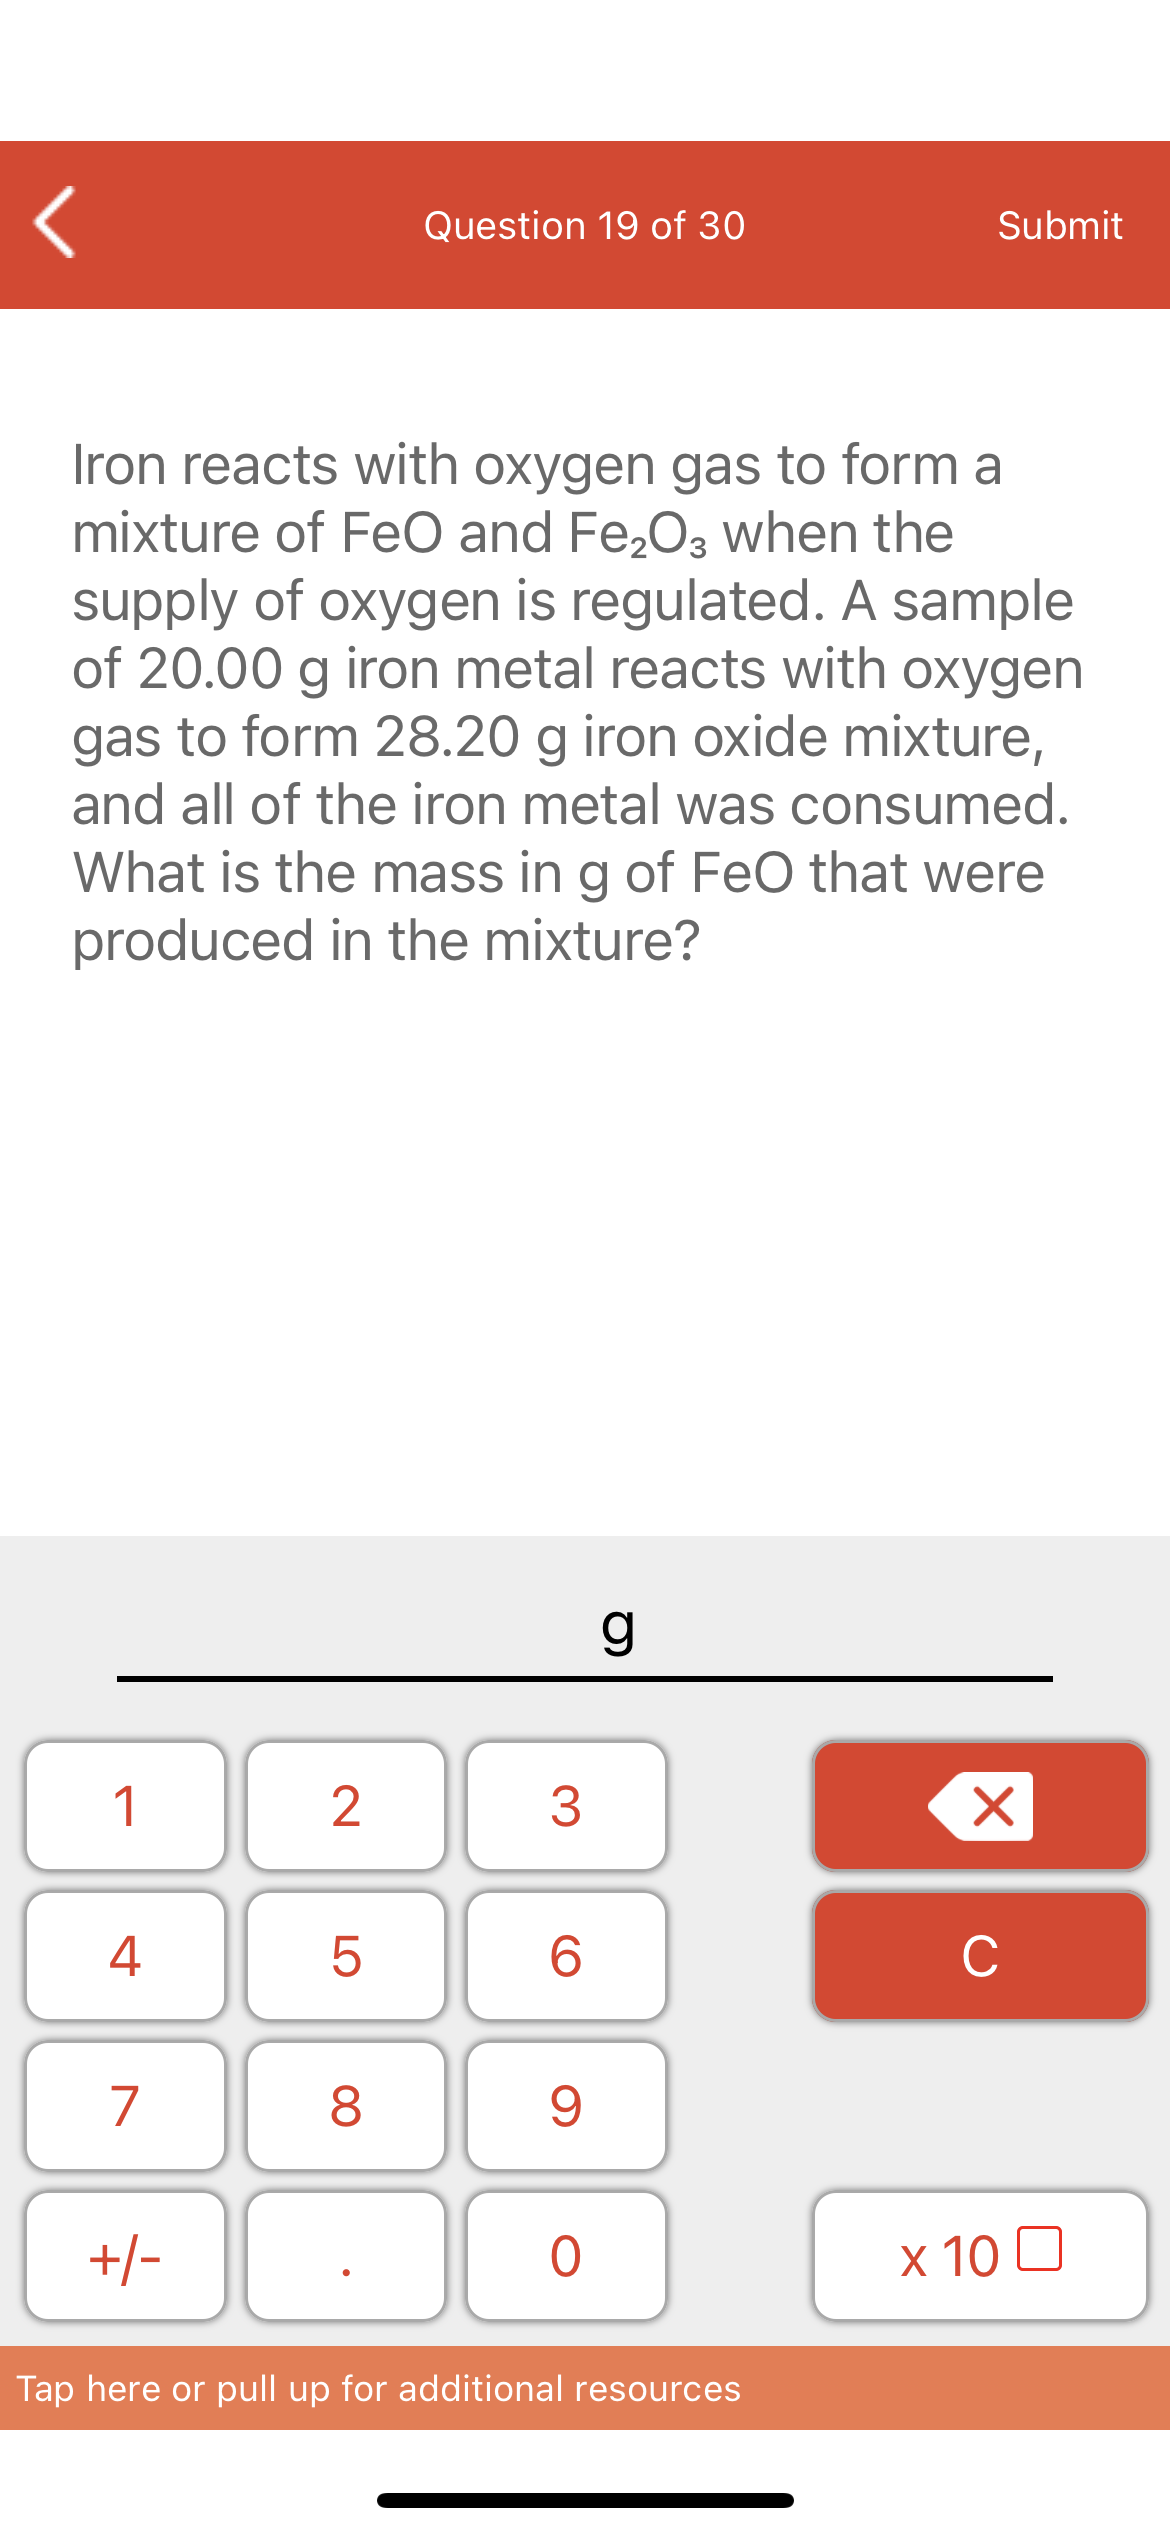 Question 19 of 30
Submit
Iron reacts with oxygen gas to form a
mixture of FeO and Fe,O3 when the
supply of oxygen is regulated. A sample
of 20.00 g iron metal reacts with oxygen
gas to form 28.20 g iron oxide mixture,
and all of the iron metal was consumed.
What is the mass in g of FeO that were
produced in the mixture?
1
4
6.
C
7
+/-
х 10 0
Tap here or pull up for additional resources
LO
00
